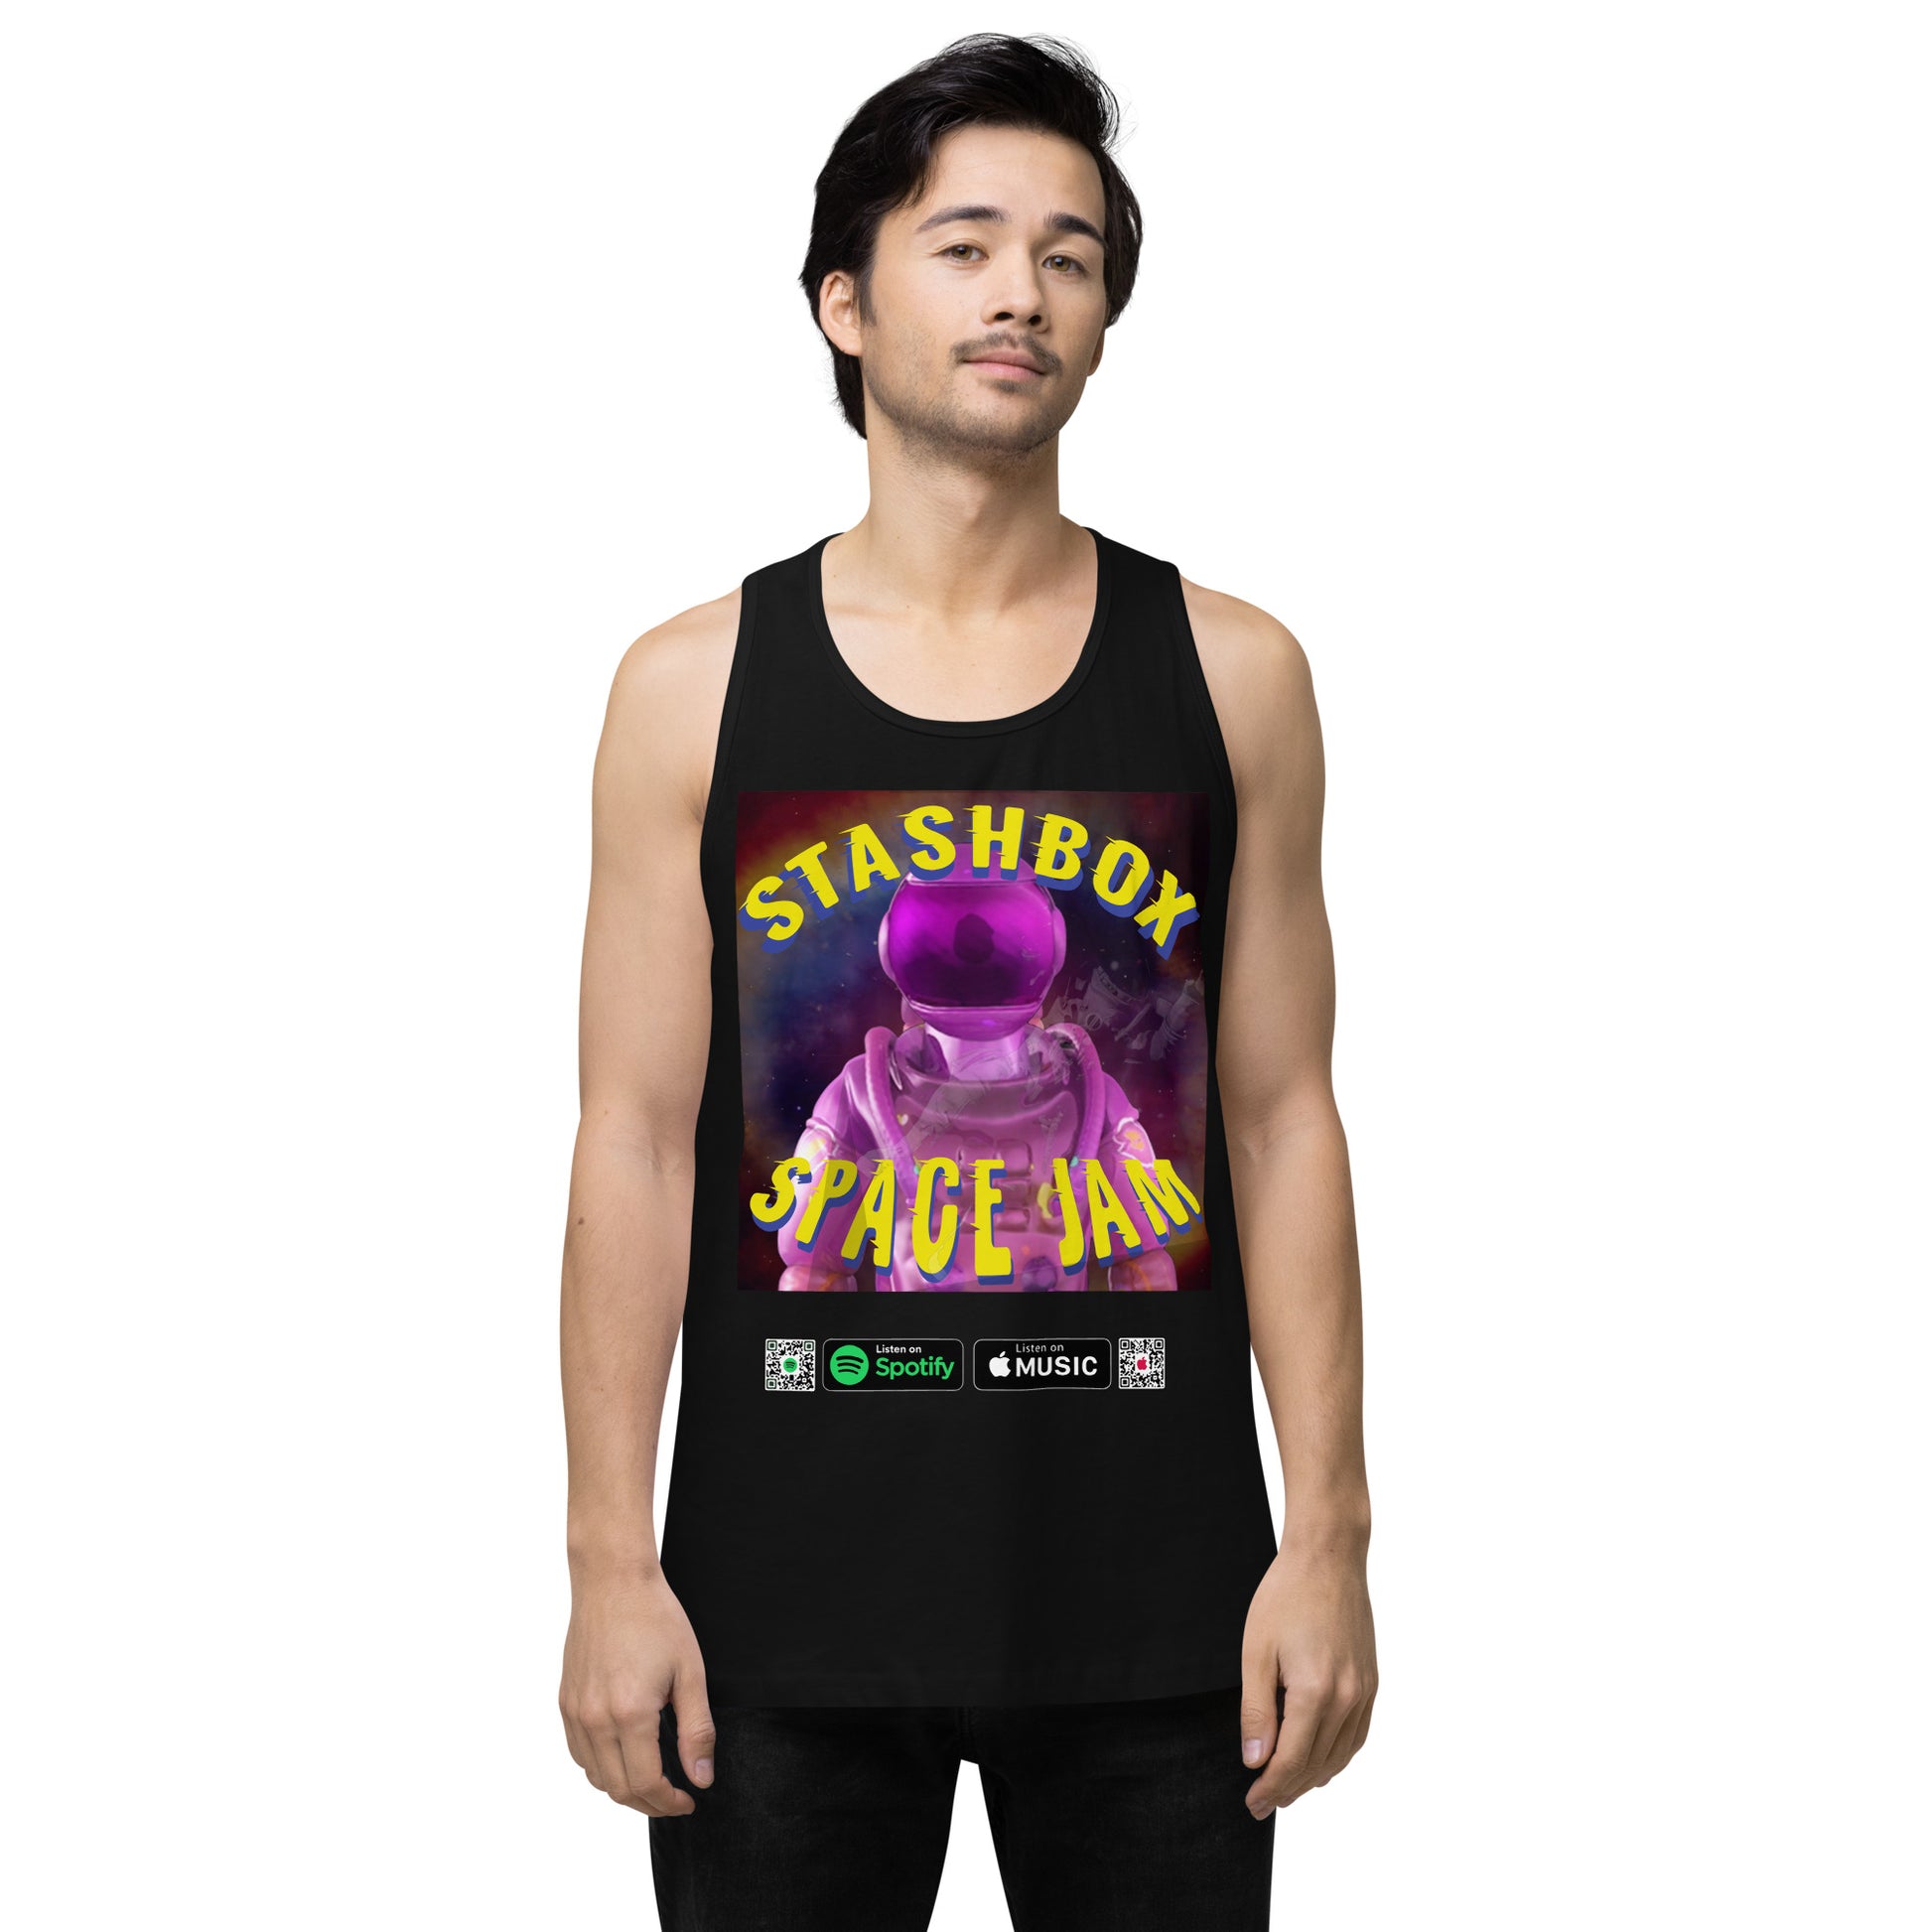 Space Jam: Unleash Cosmic Style with Stashbox Men’s Premium Tank Top, Artwork #005. Dive into the universe with this premium tank, perfect for space enthusiasts and trendsetters. #StashboxGalaxy #SpaceExplorationFashion #CosmicComfort"